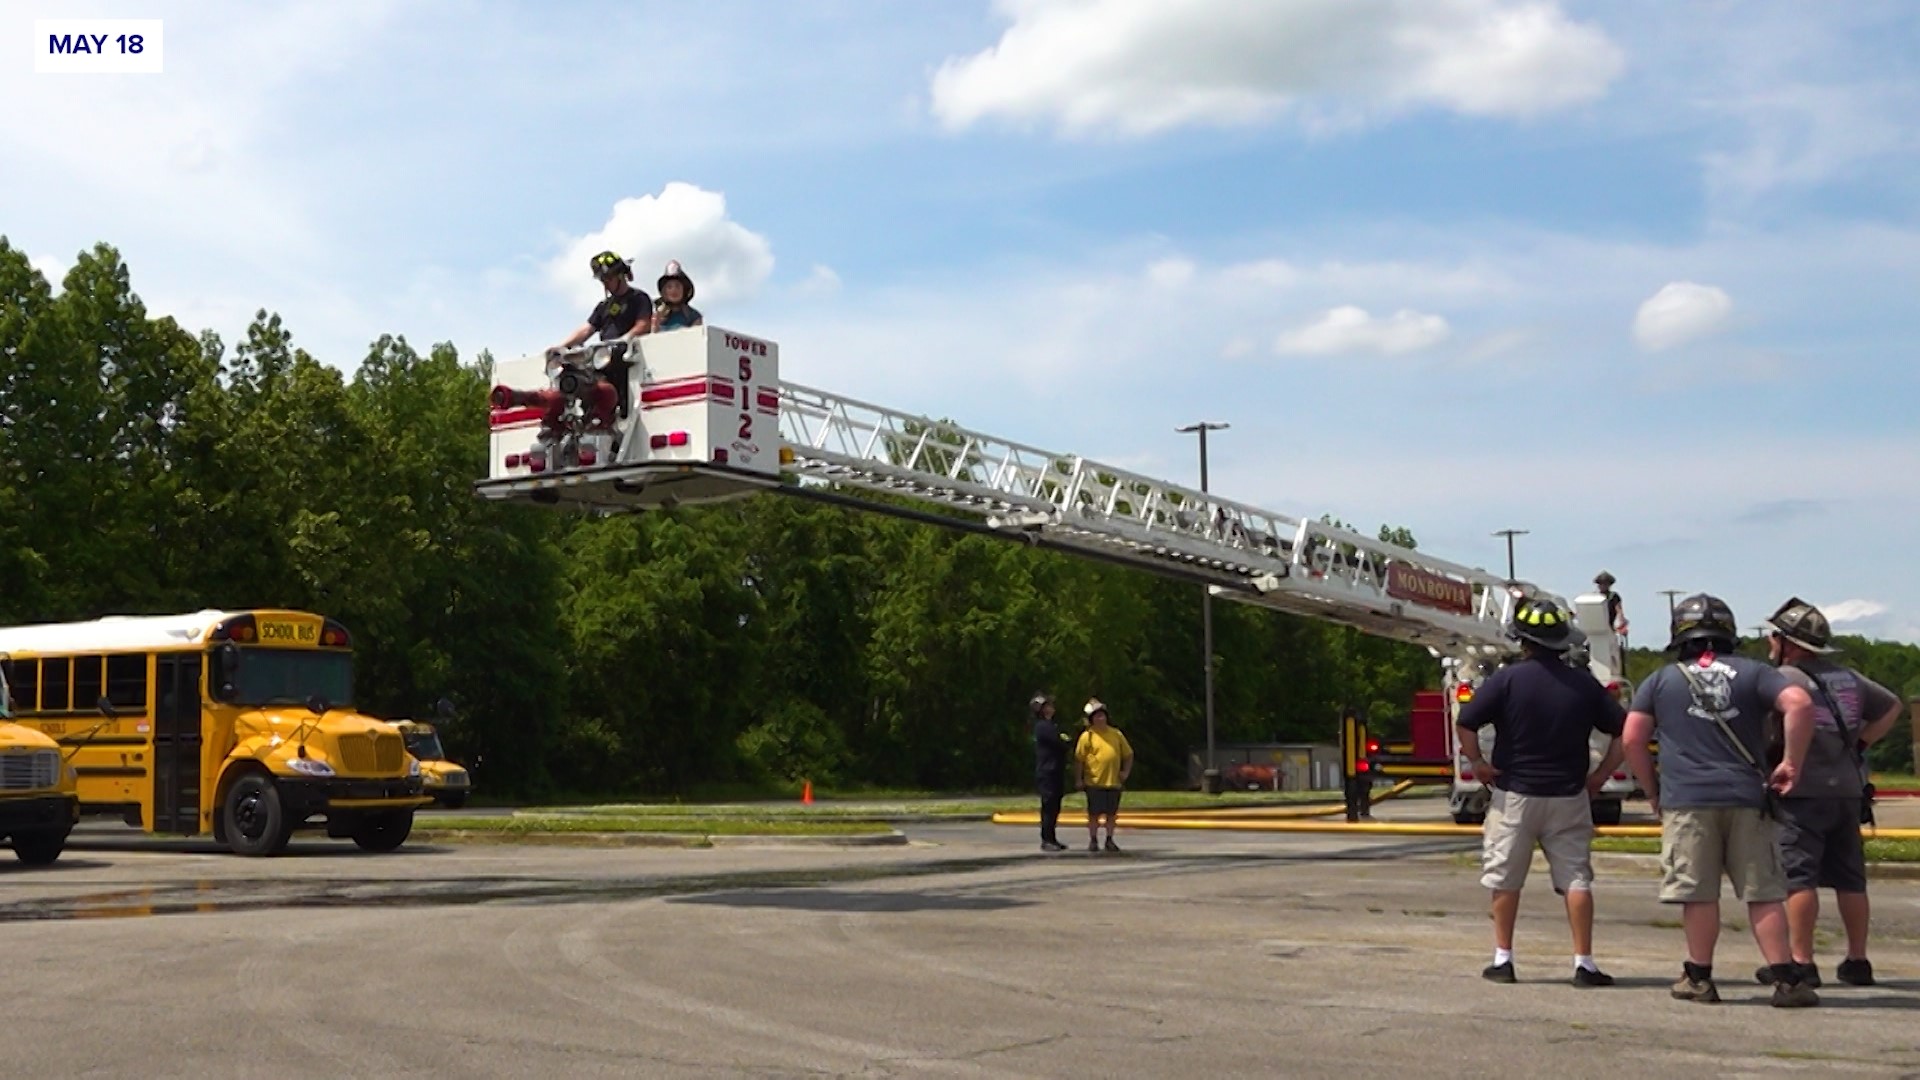 The Monrovia Volunteer Fire and Rescue team are well on their way to being able to fully operate their new aerial ladder truck.